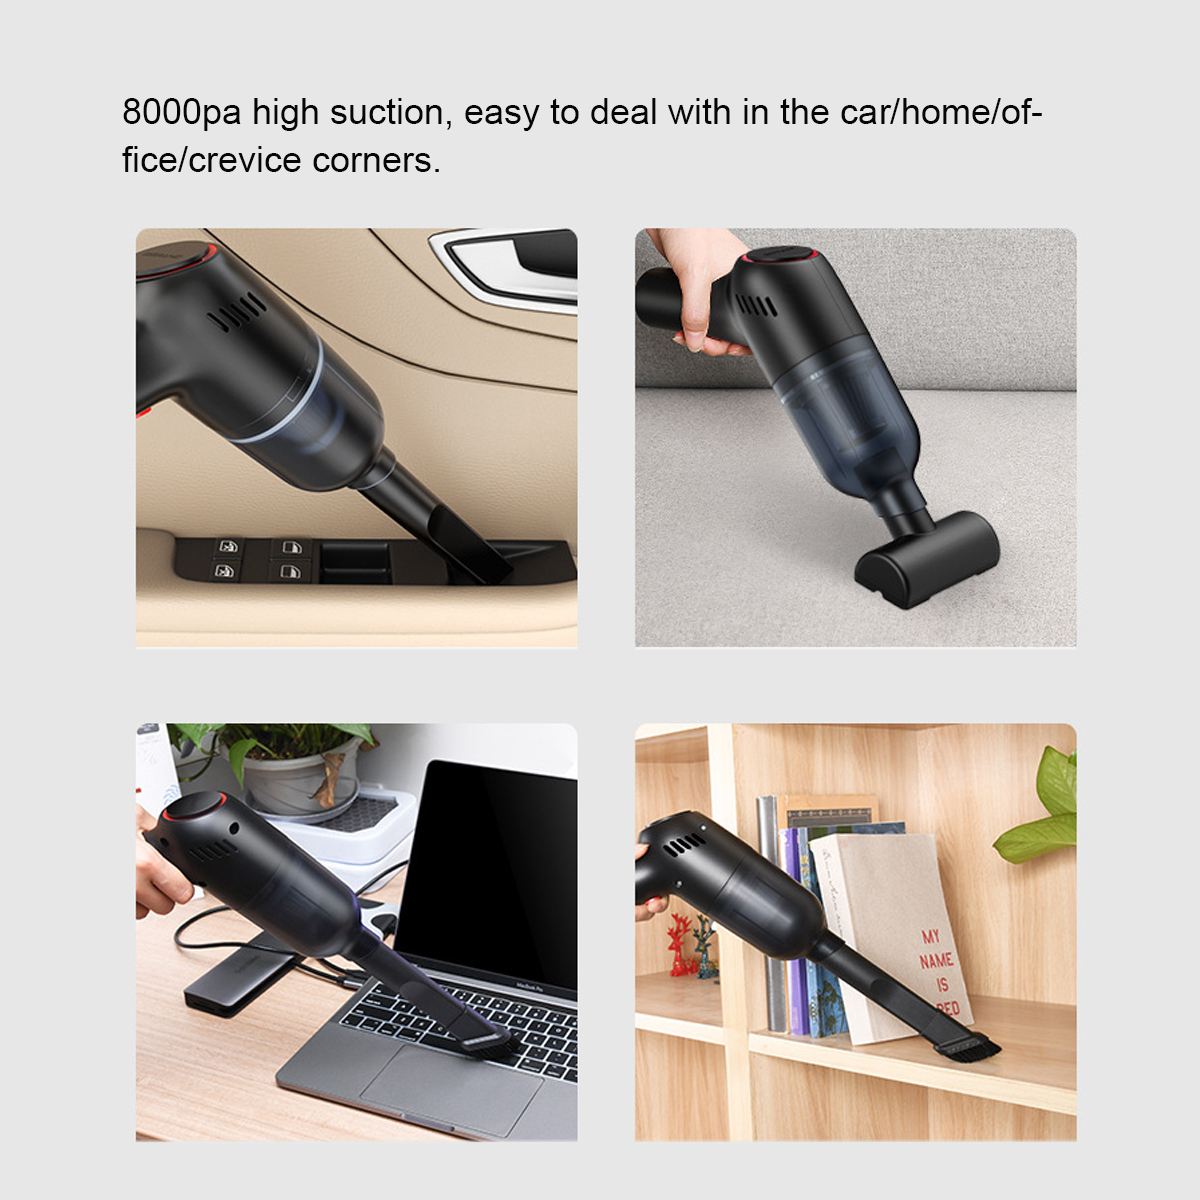 8000Pa-120W-Car-Vacuum-Cleaner-Suction-Cordless-Handheld-USB-Rechargeable-Portable-Car-Household-Vac-1888646-2